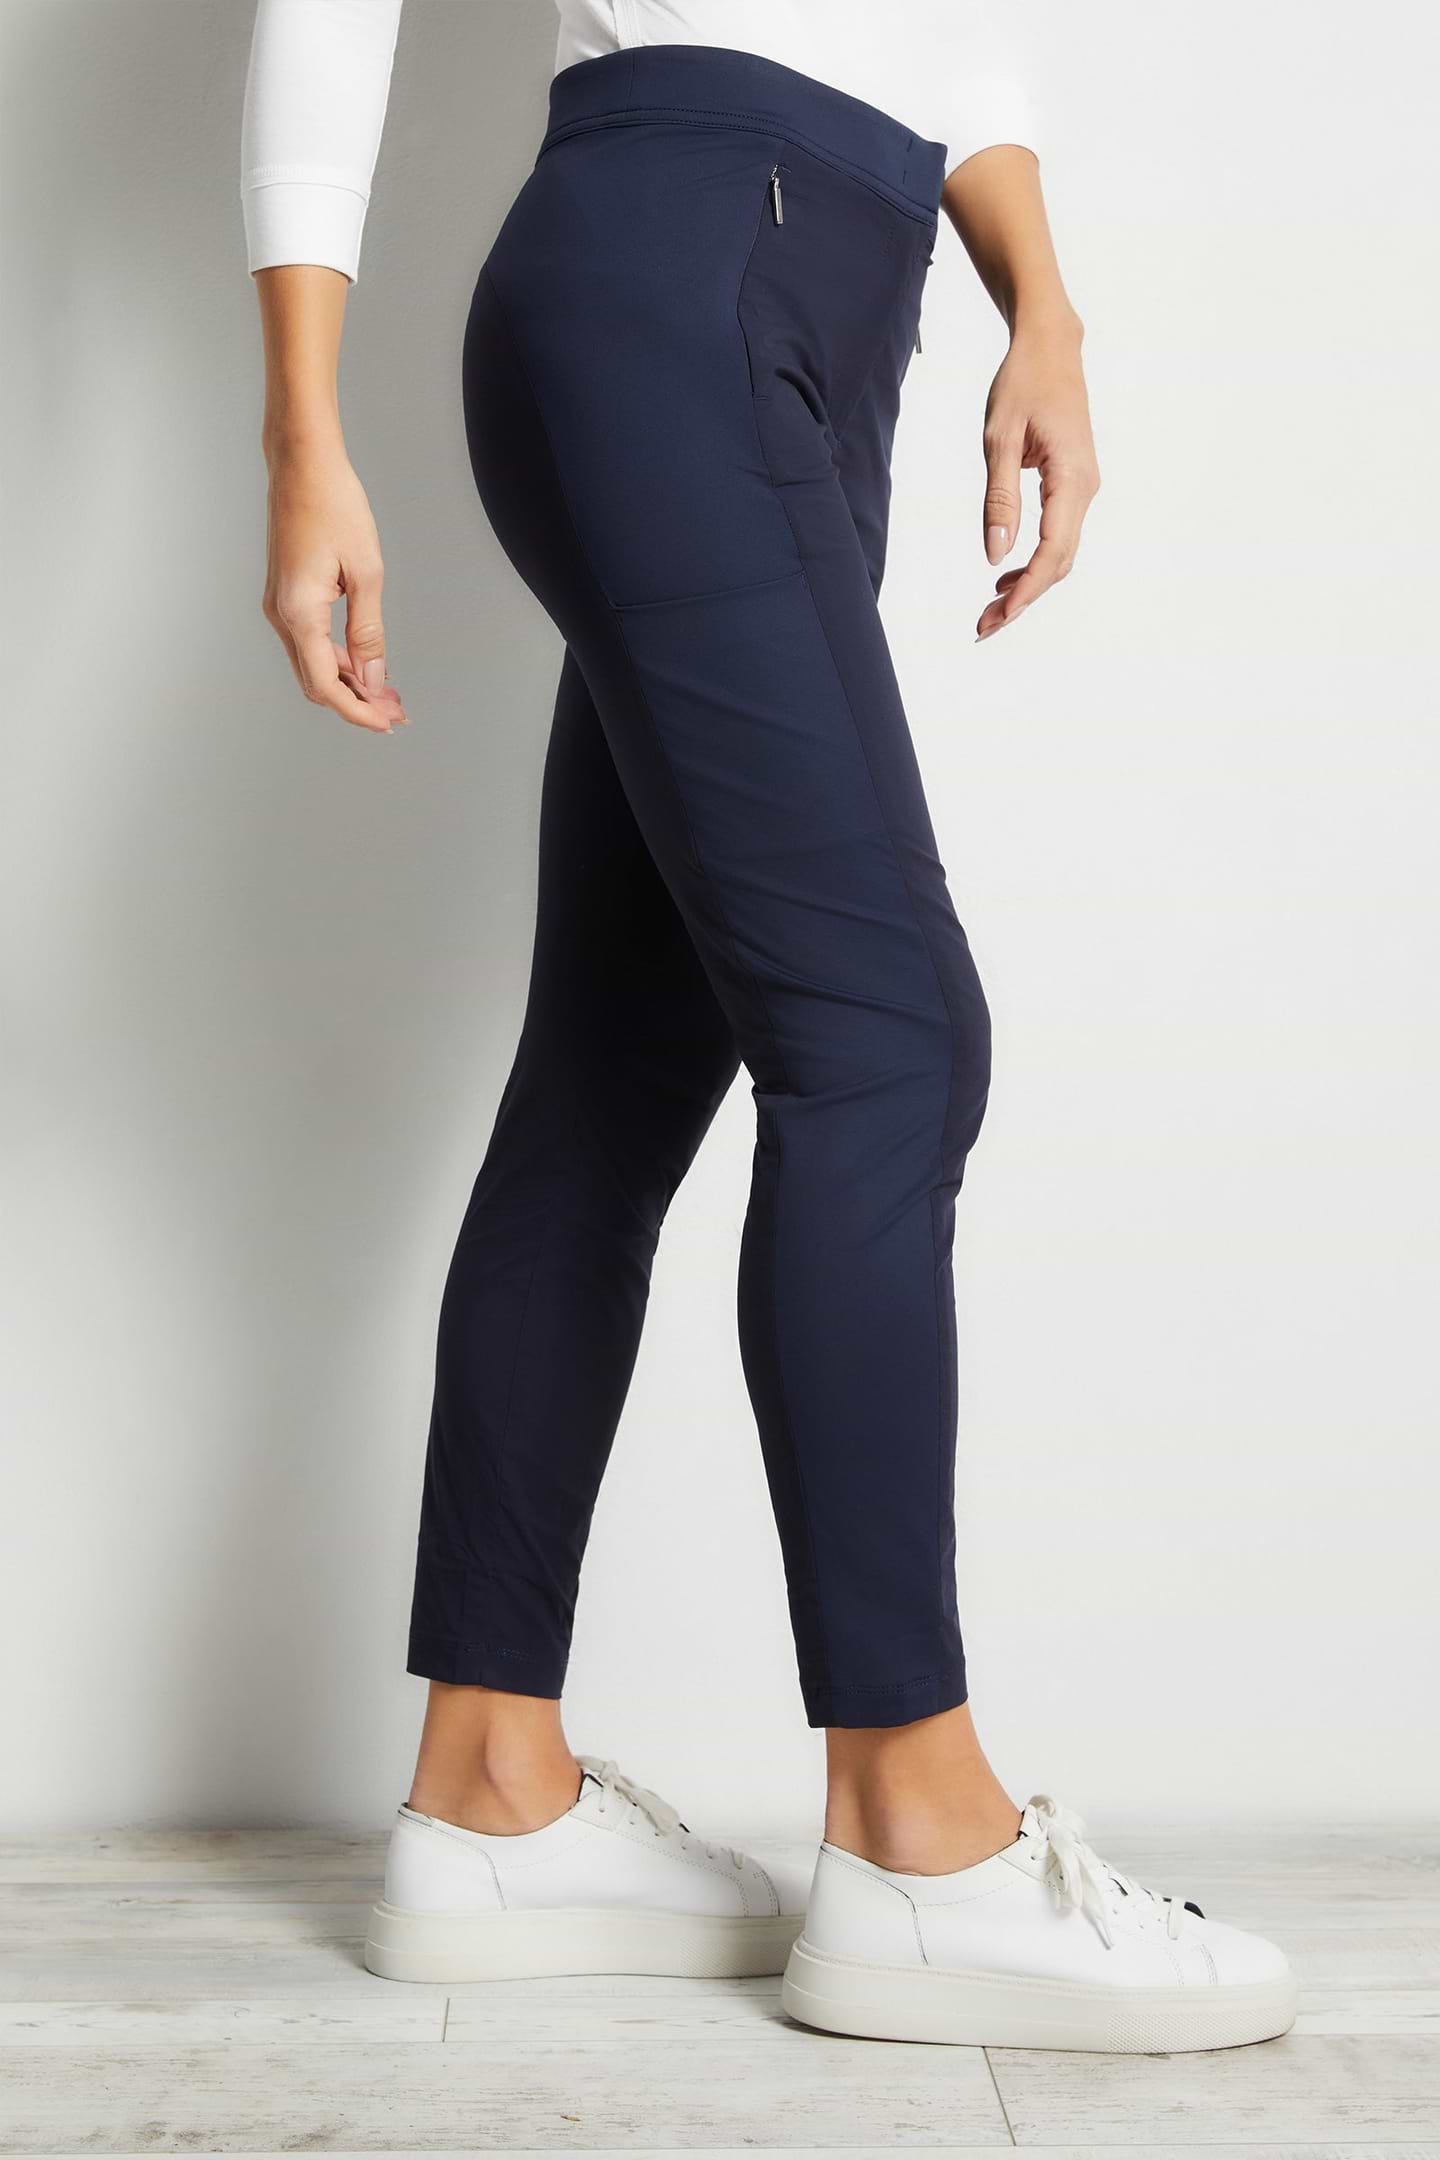 The Best Travel Pants. Side Profile of the Ipant Hybrid Zip Front Slim Fit Pant in Navy